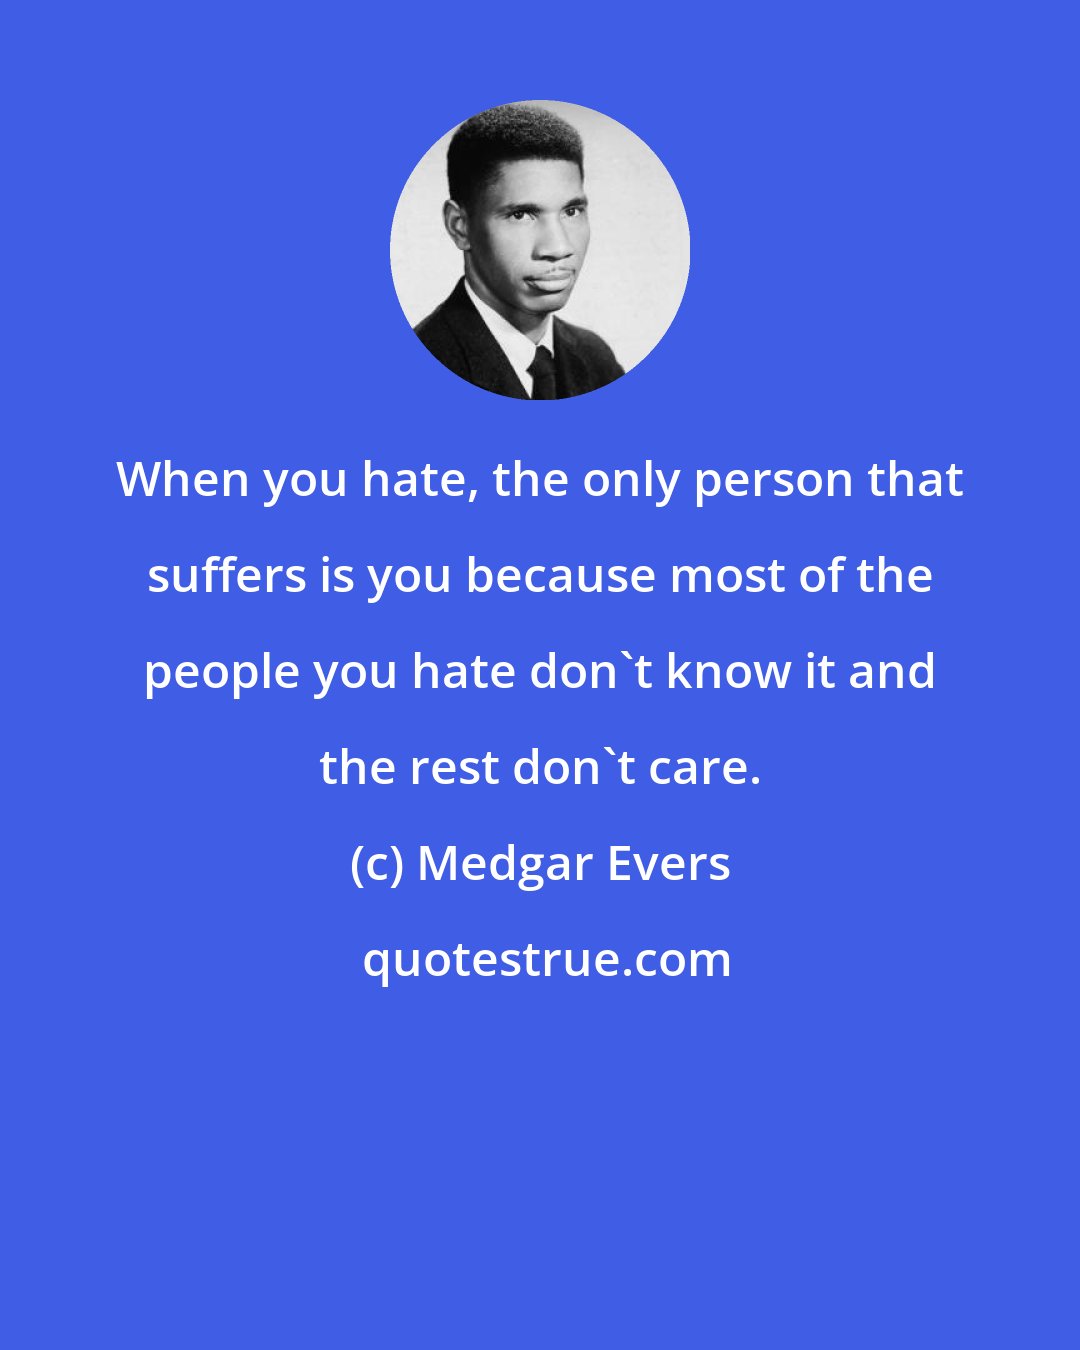 Medgar Evers: When you hate, the only person that suffers is you because most of the people you hate don't know it and the rest don't care.